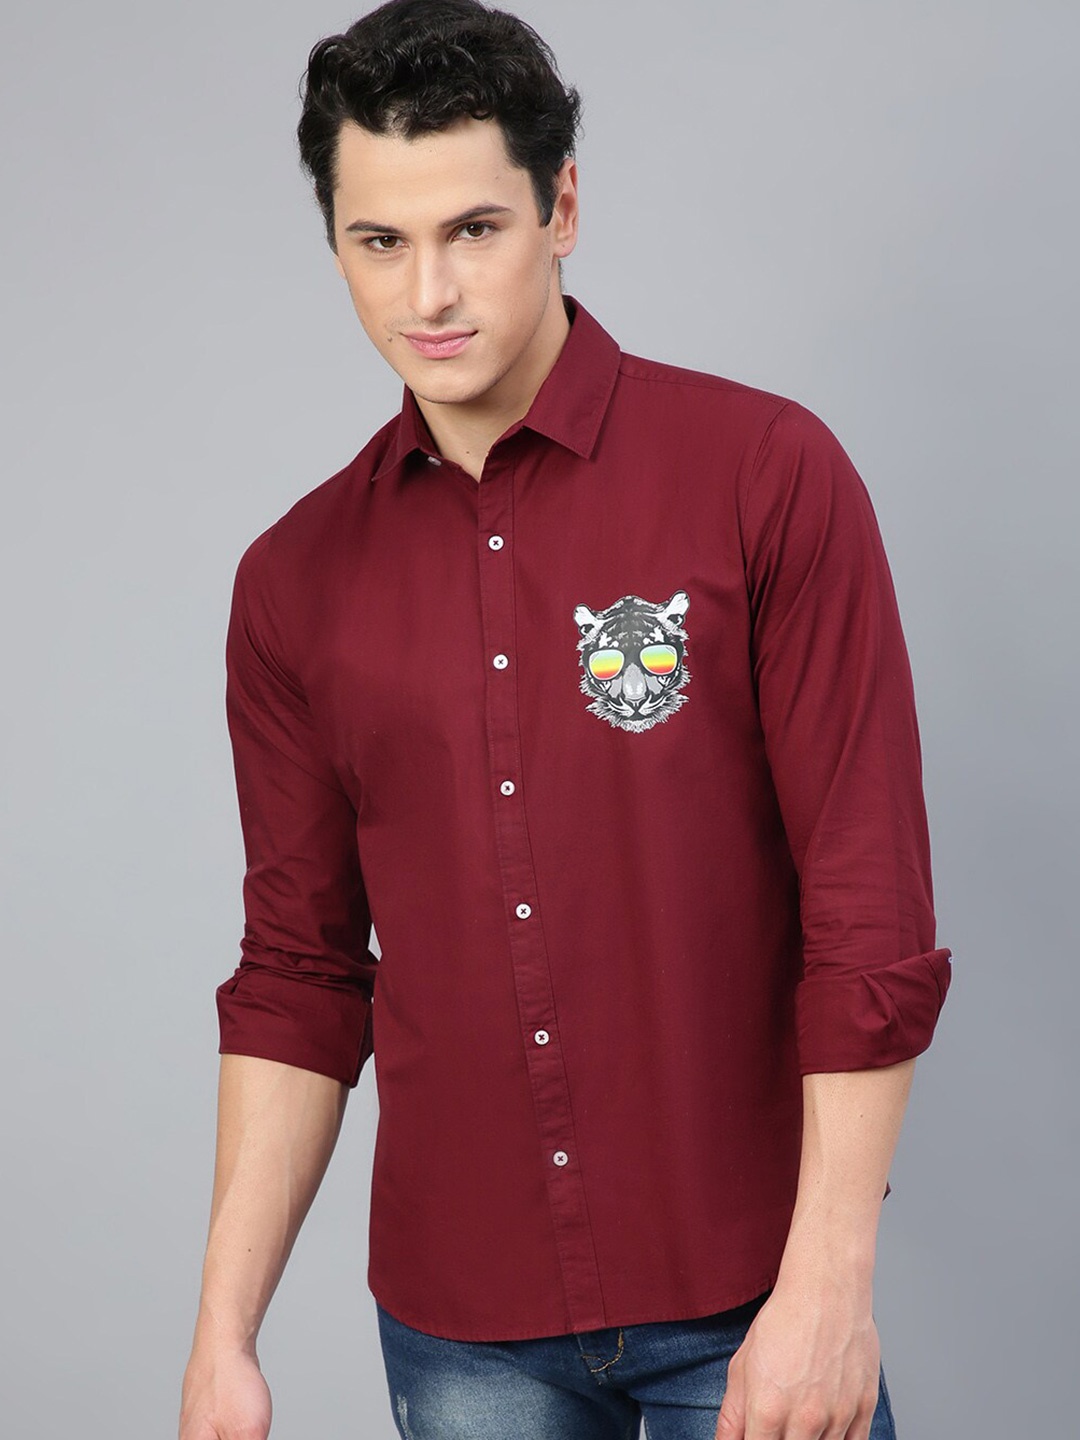 

FTX Standard Spread Collar Graphic Printed Opaque Cotton Casual Shirt, Maroon